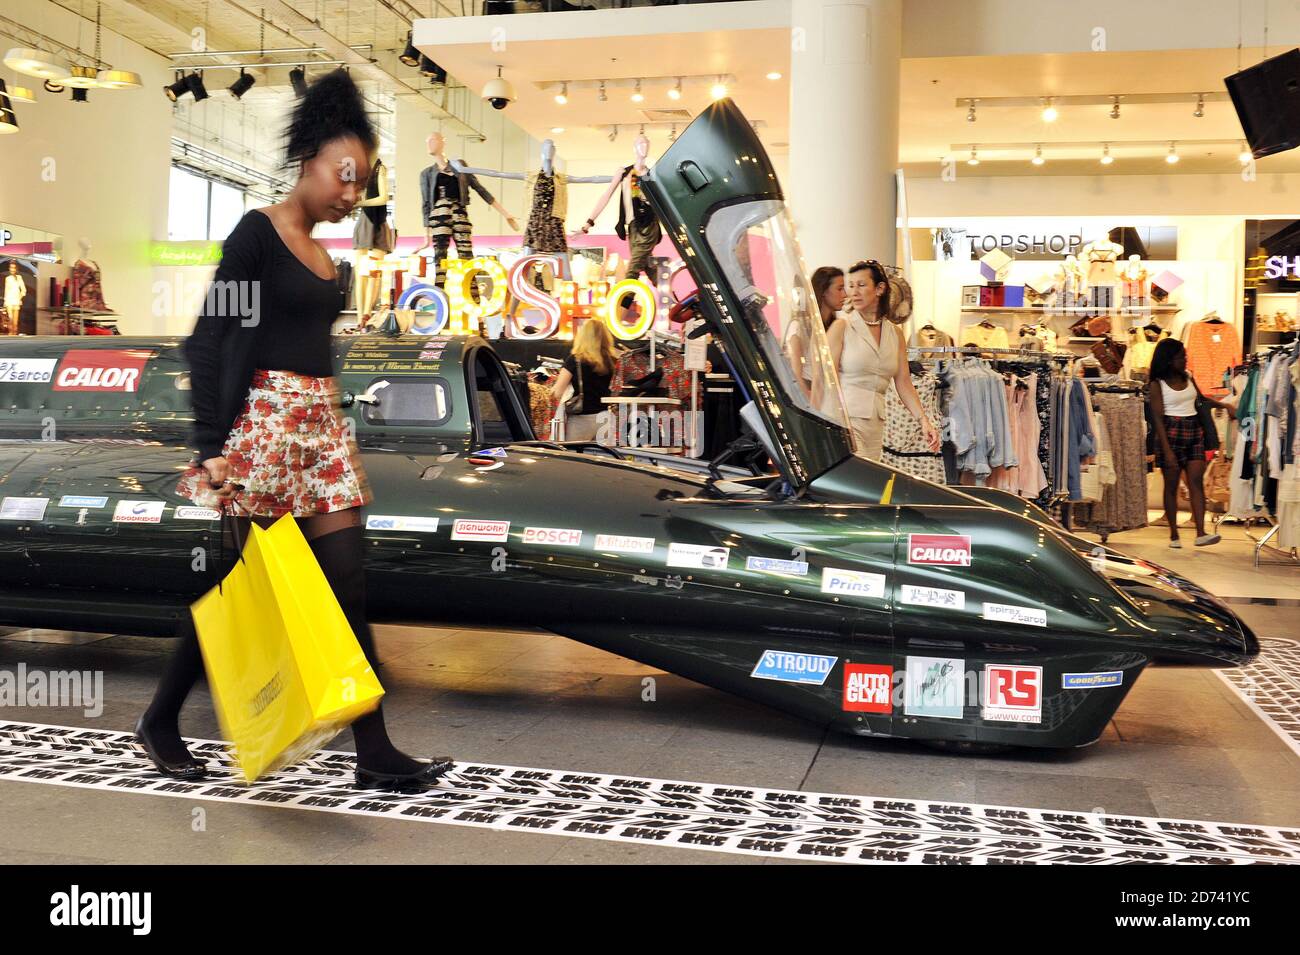 The British Steam Car on display in Selfridge's store in central London. The car broke the land speed record for a steam-powered vehicle, reaching 139 mph in August 2009, and will be on display at Selfridge's all week.  Stock Photo